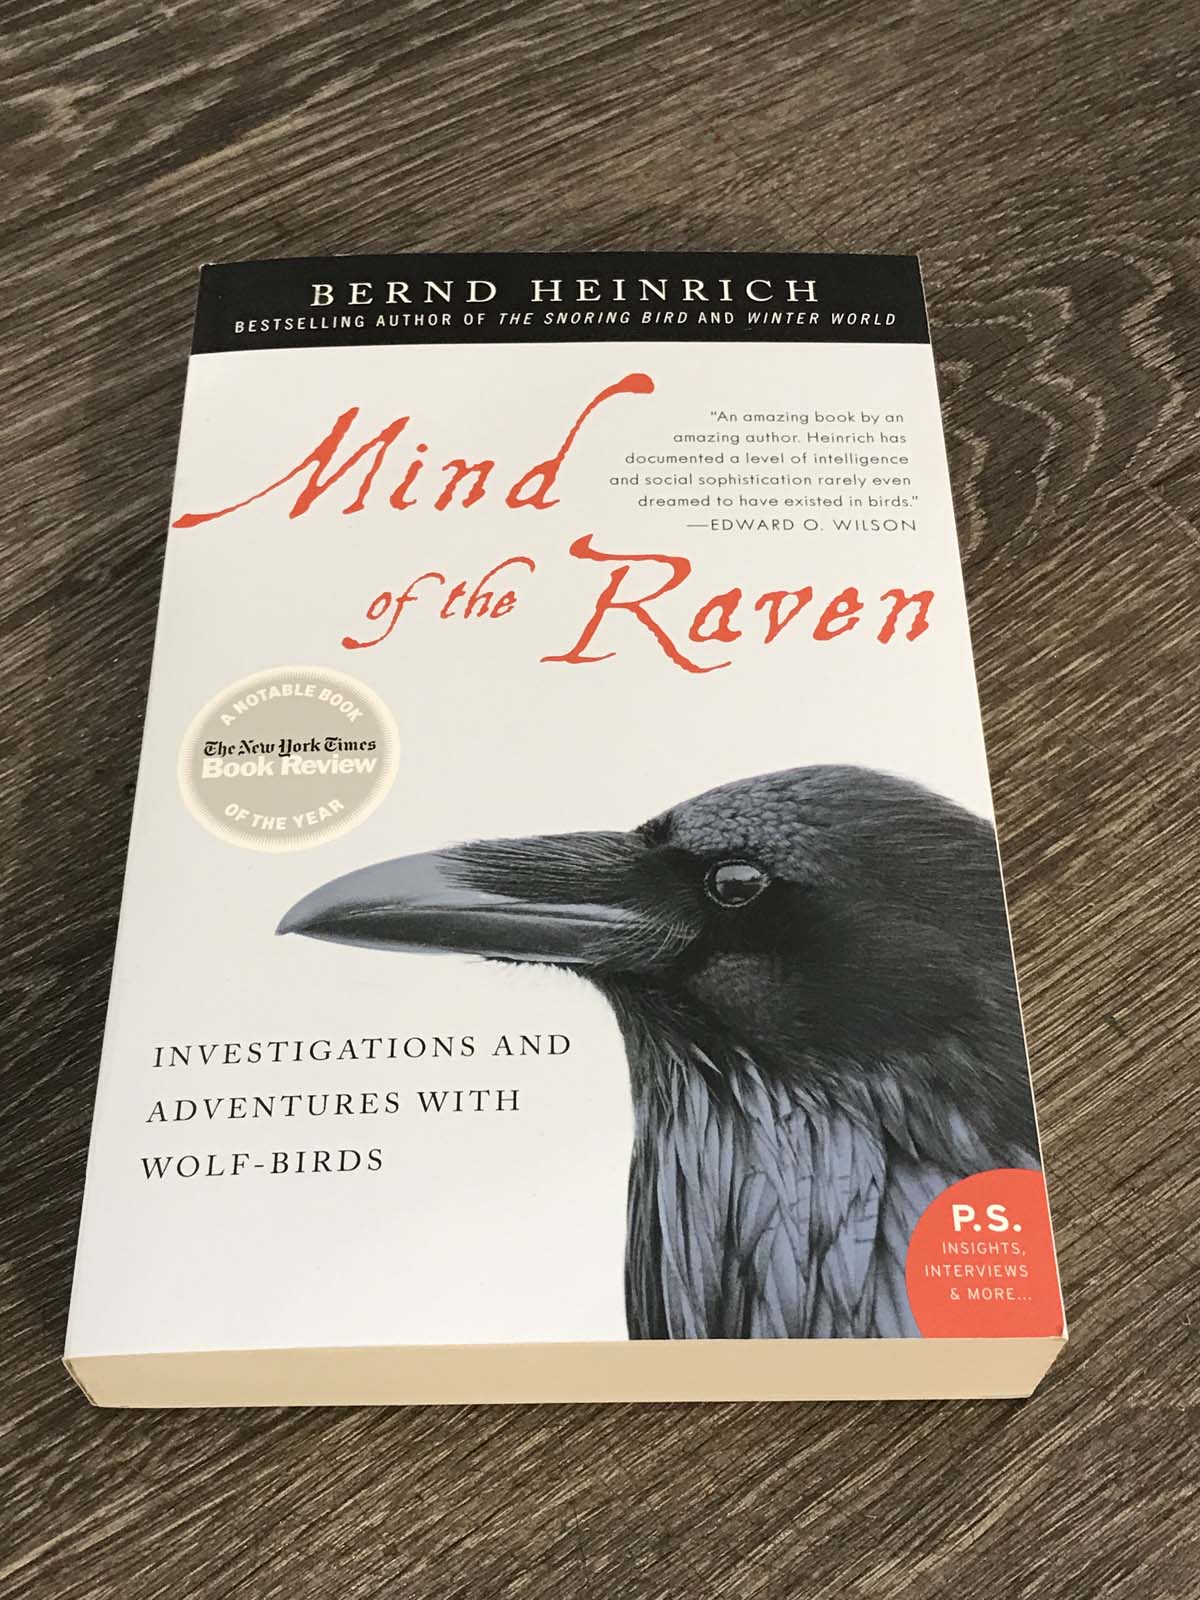 Book cover for Bernd Heinrich's Mind of the Raven. A raven is featured at the bottom right of the book cover.